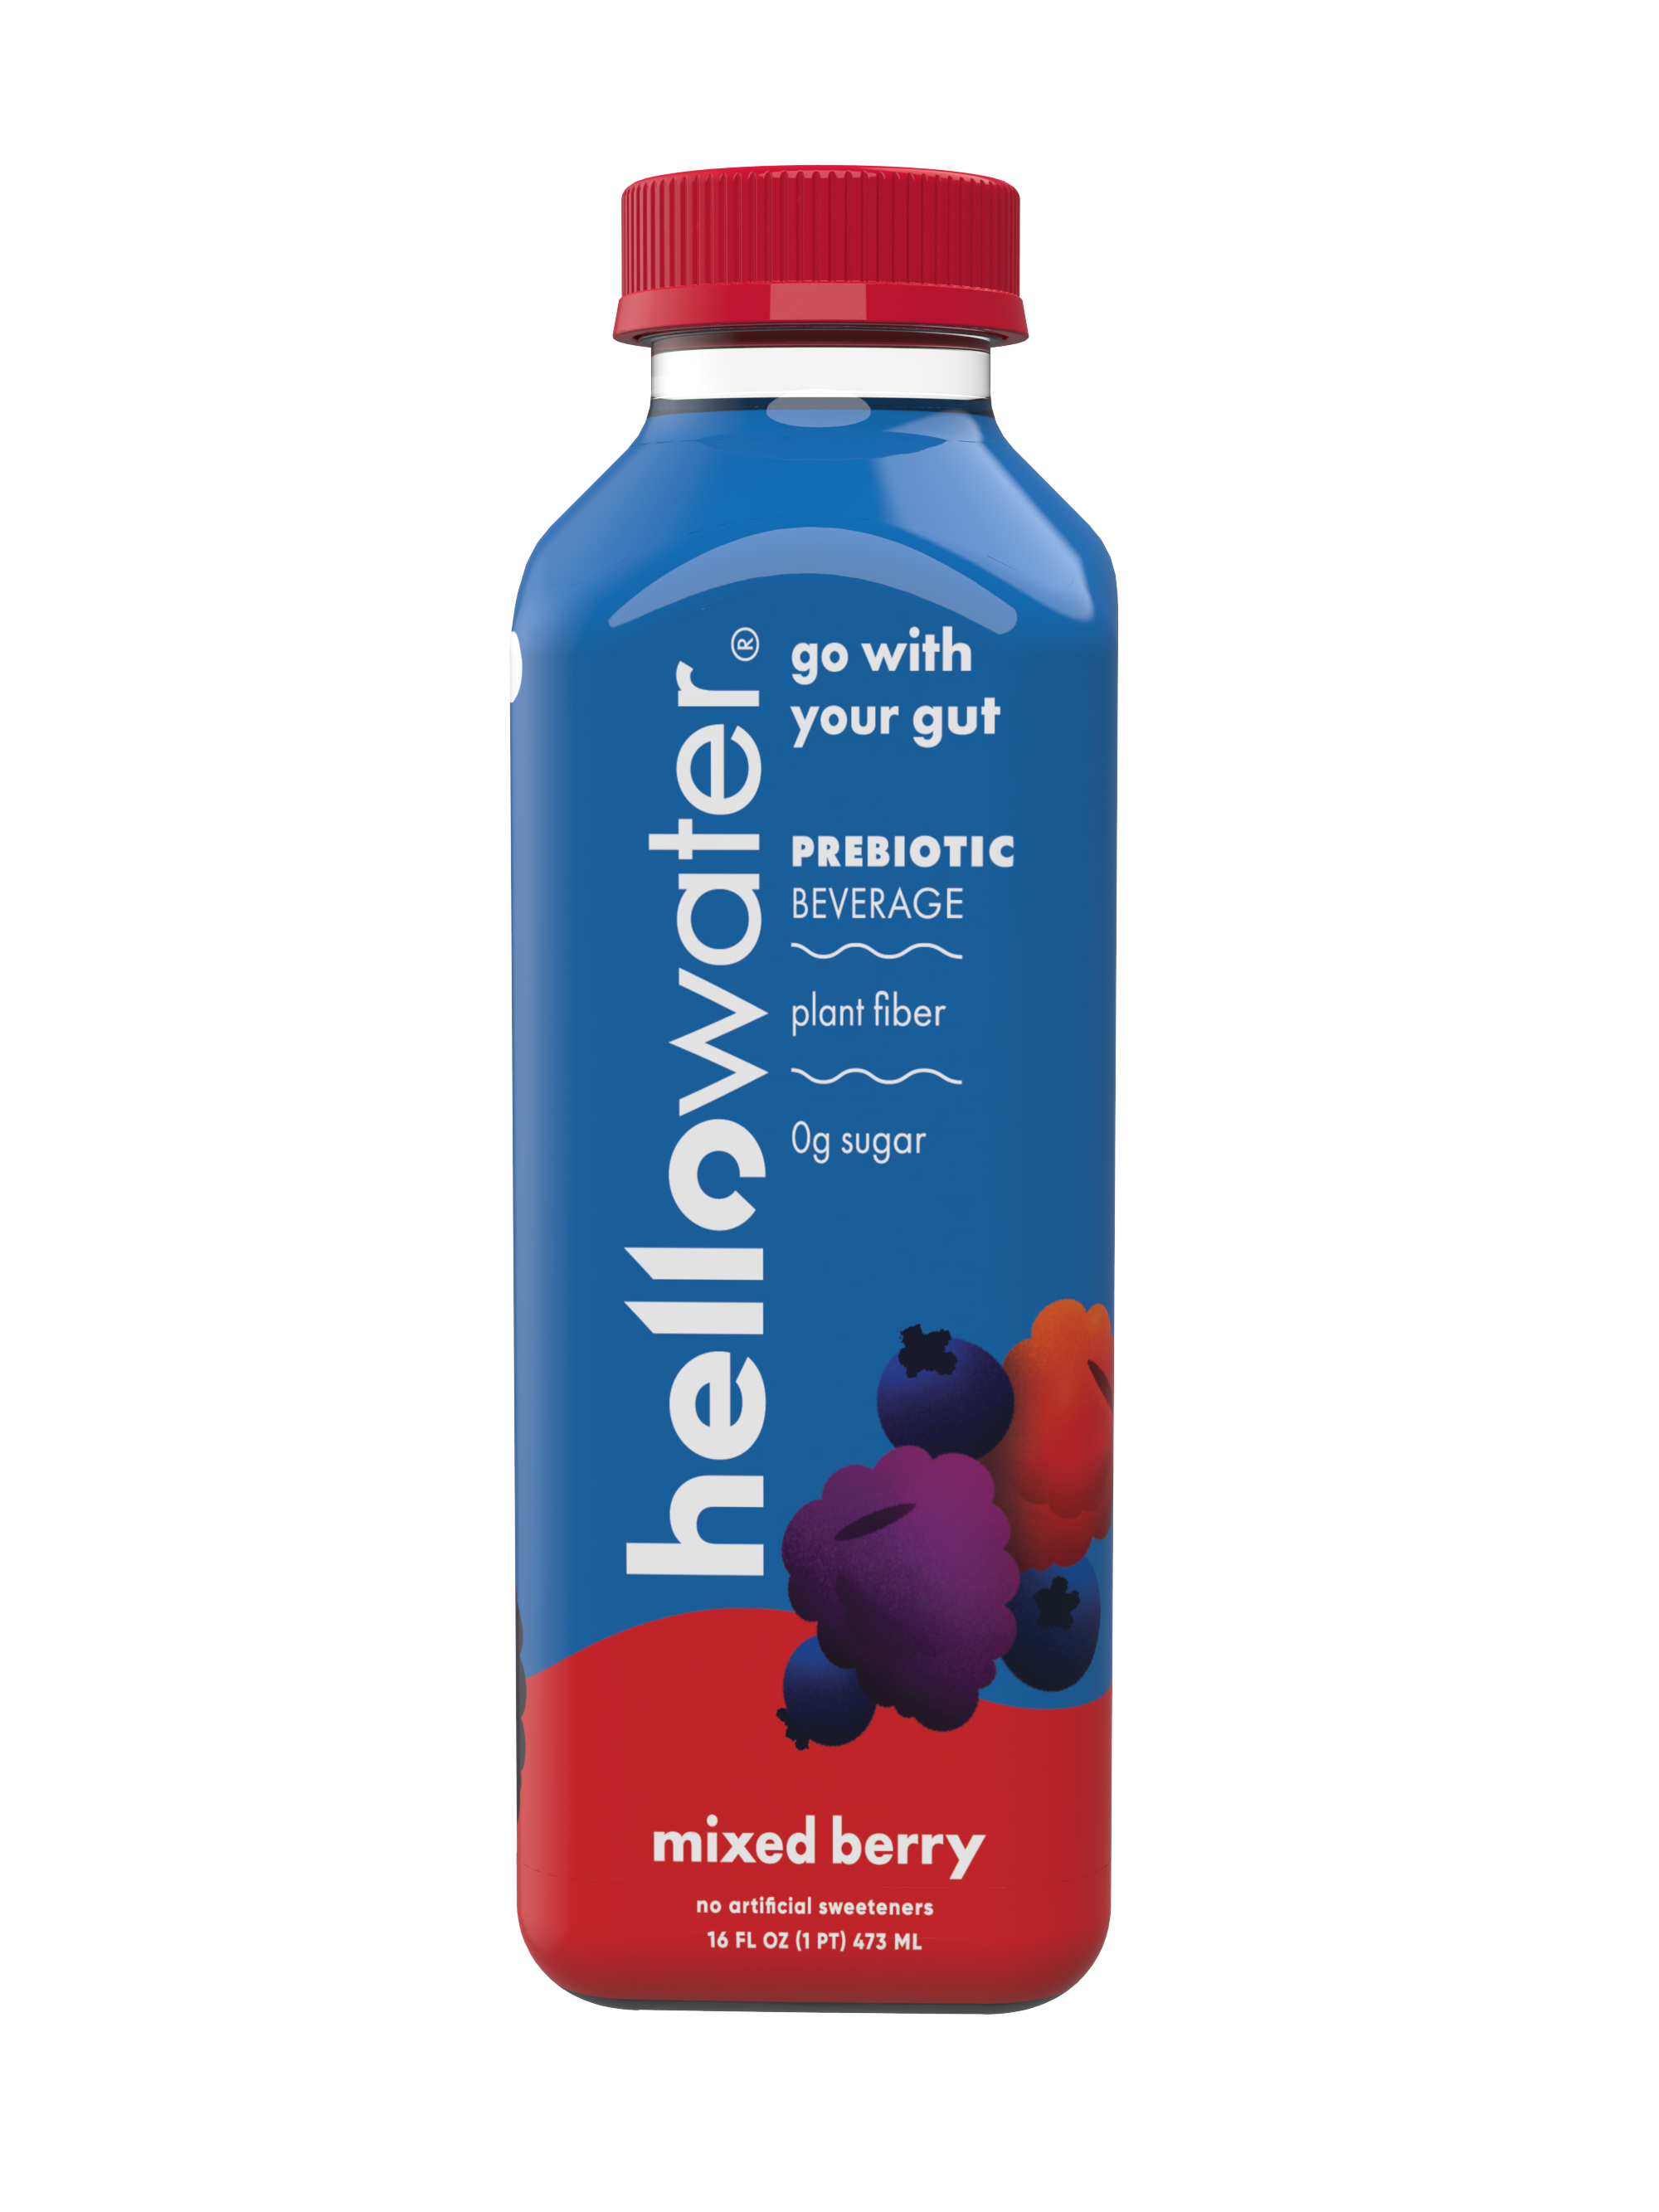 hellowater Prebiotic - Mixed Berry - SMILE 12 units per case 16.0 oz